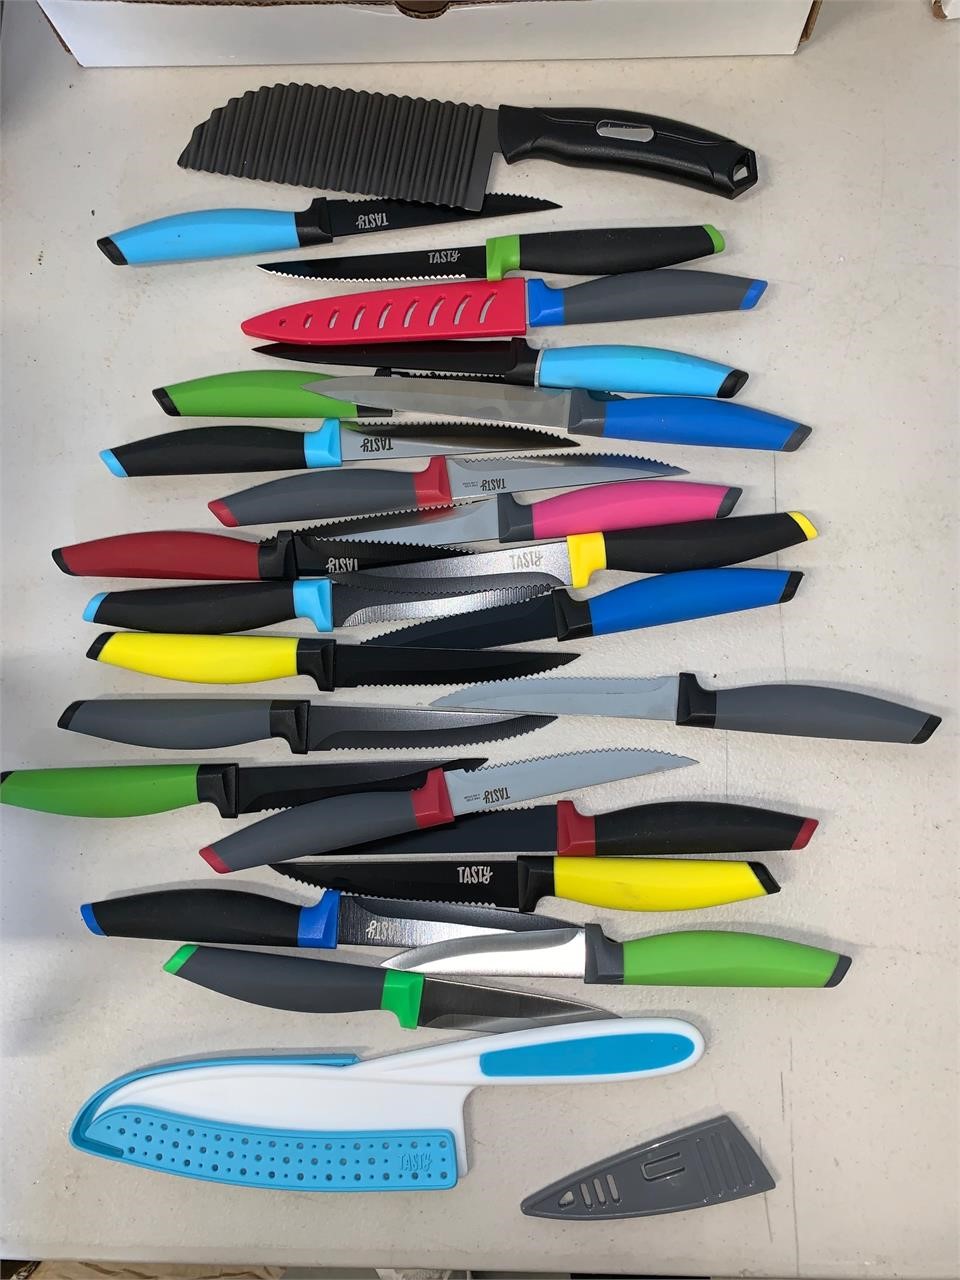 LOT OF 25 ASSORTED KNIVES